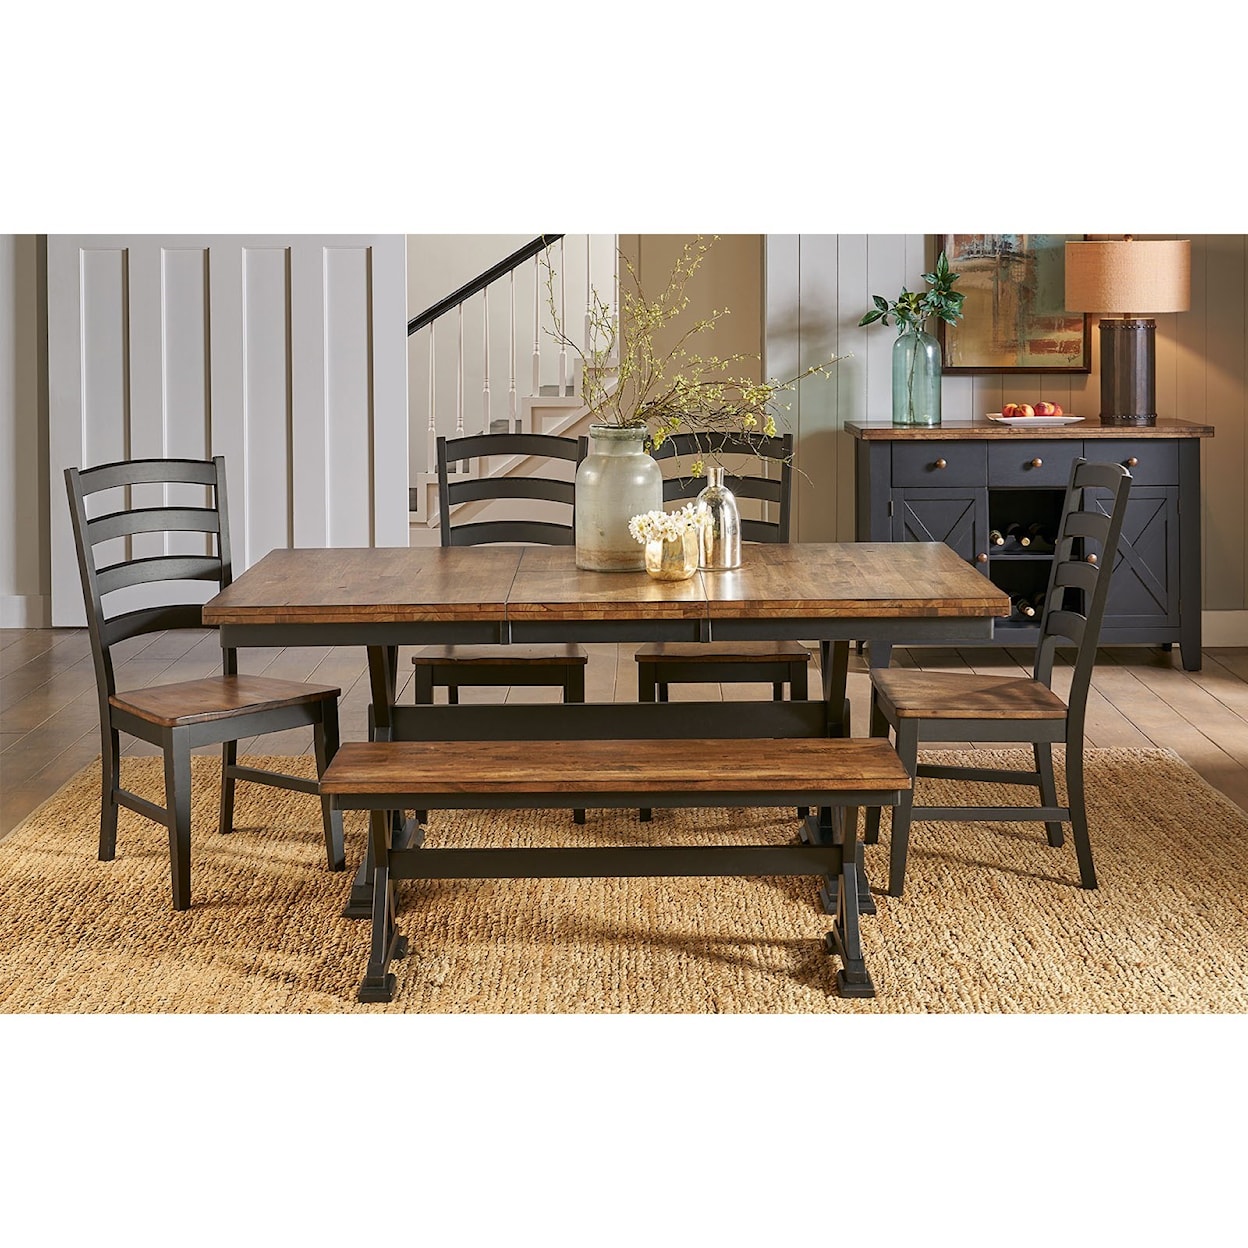 AAmerica Stone Creek Table and Chair Set with Bench